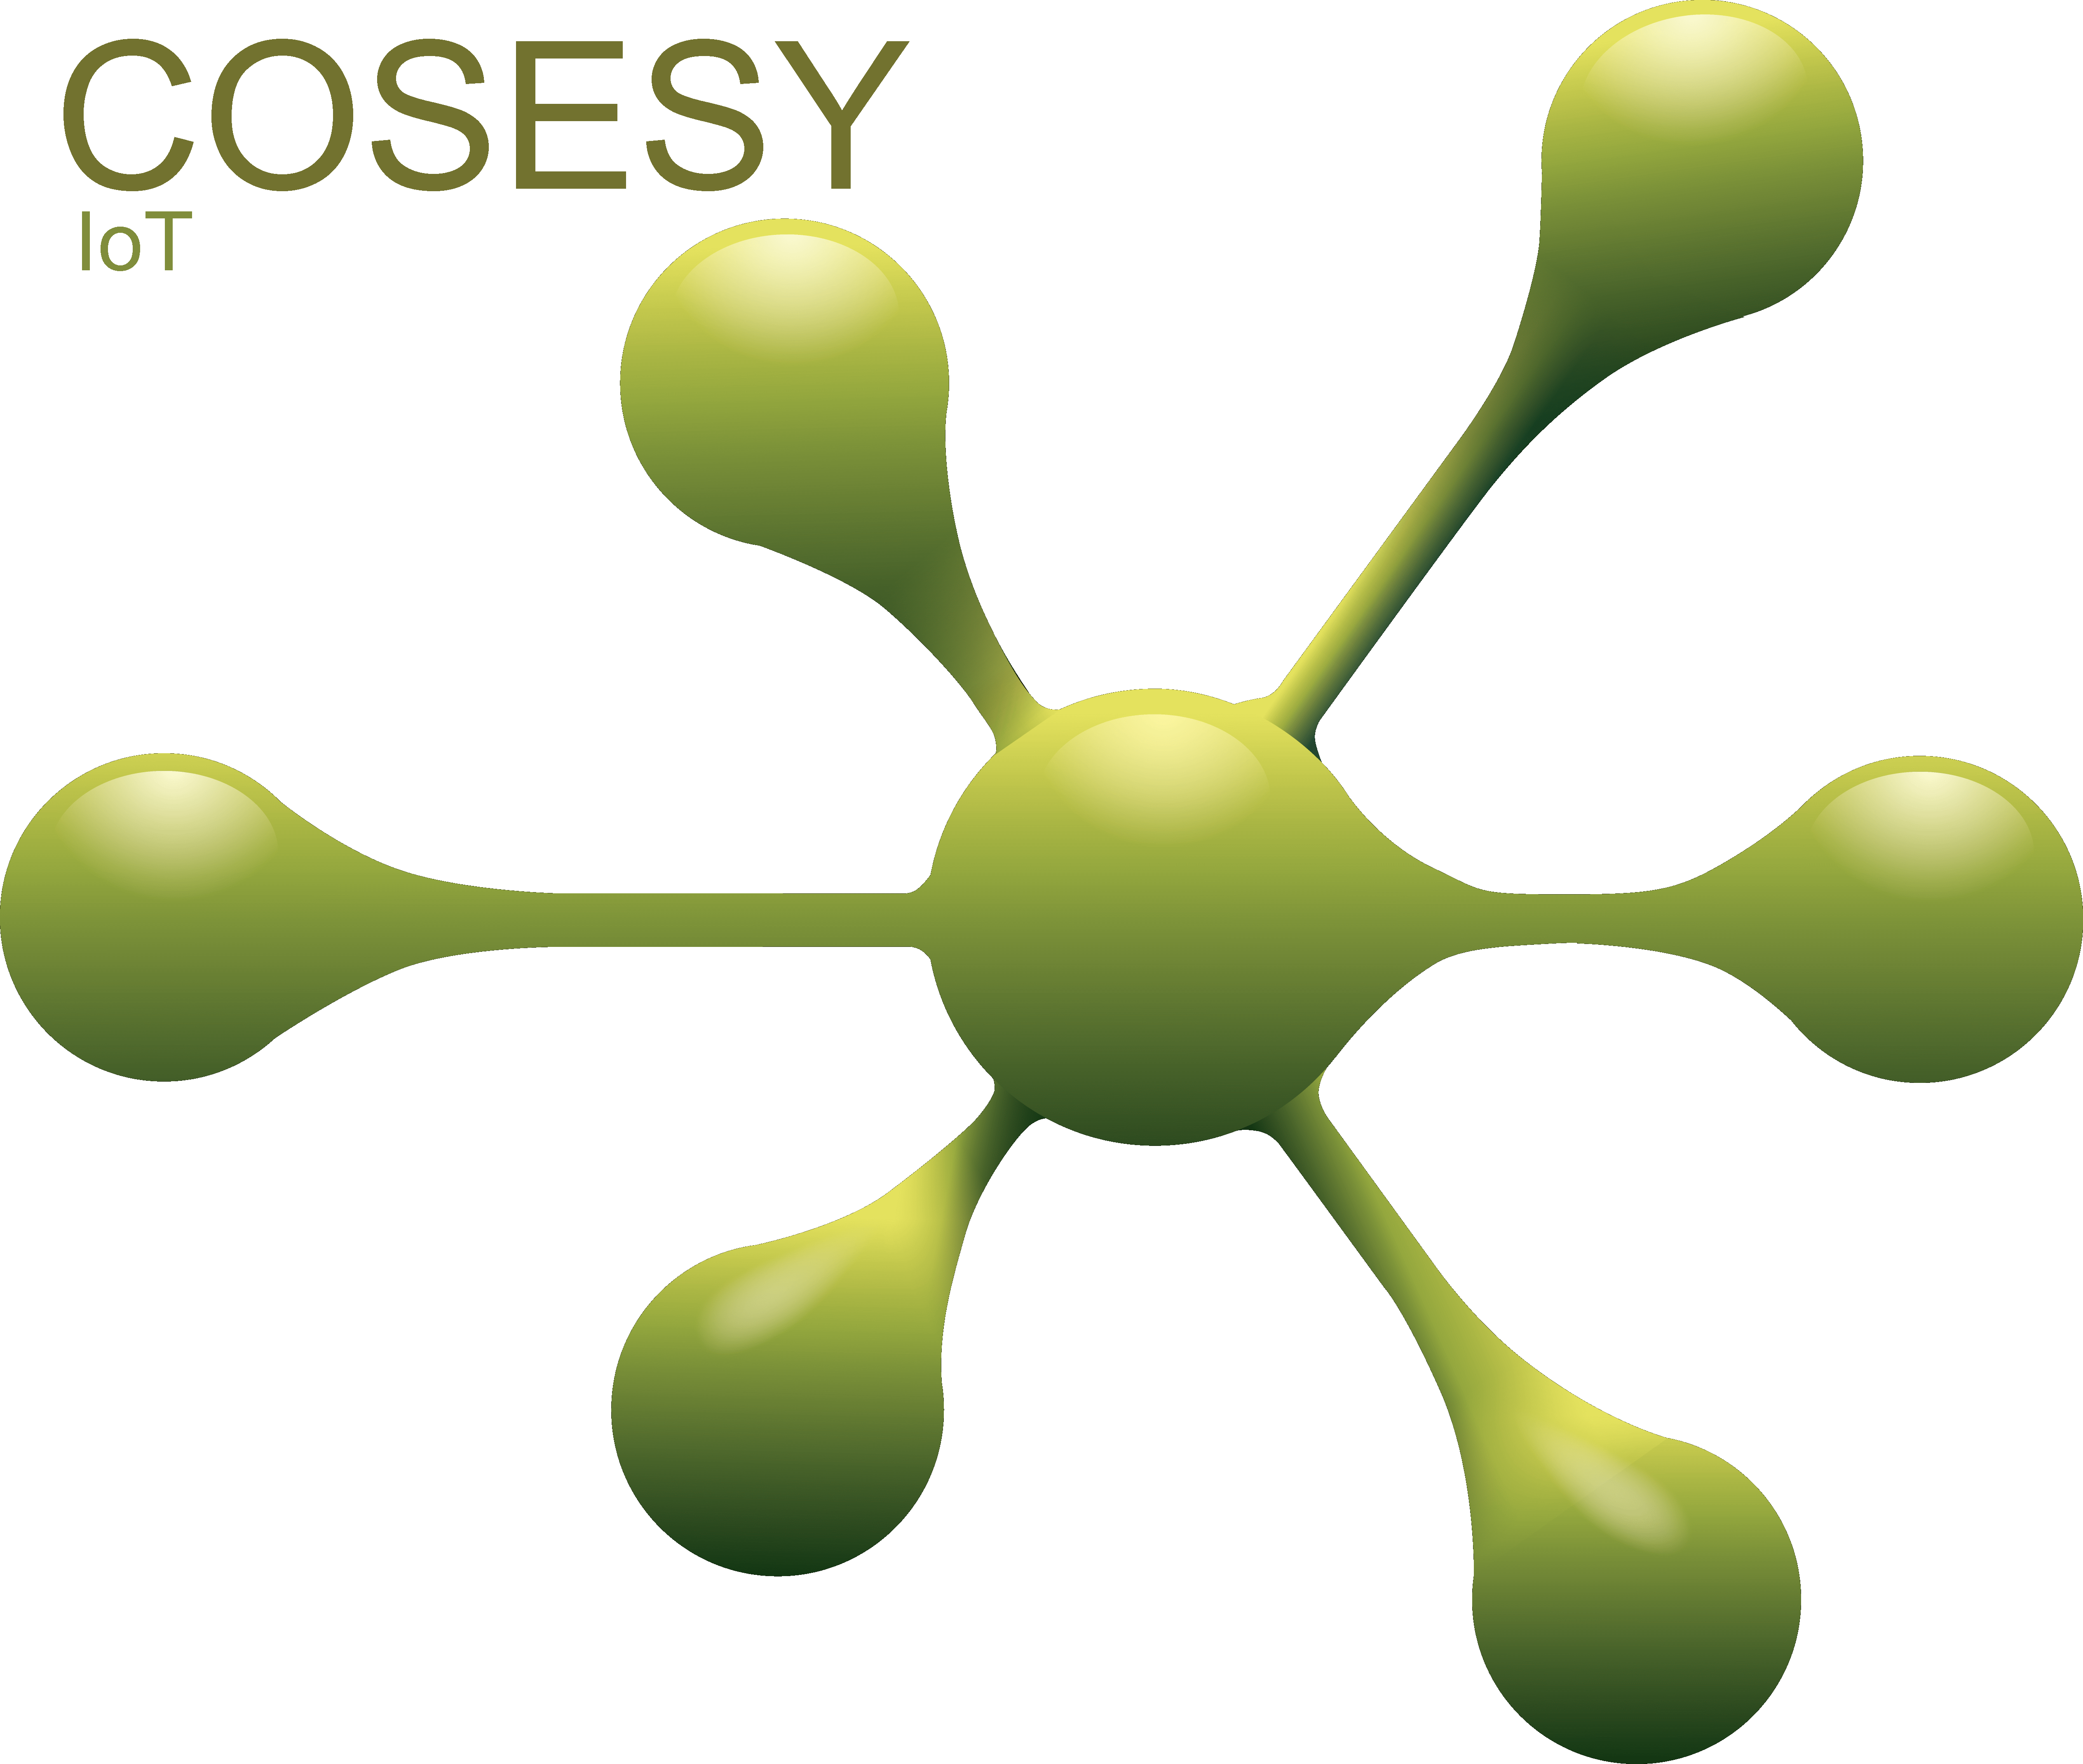 Cosesy Support Site